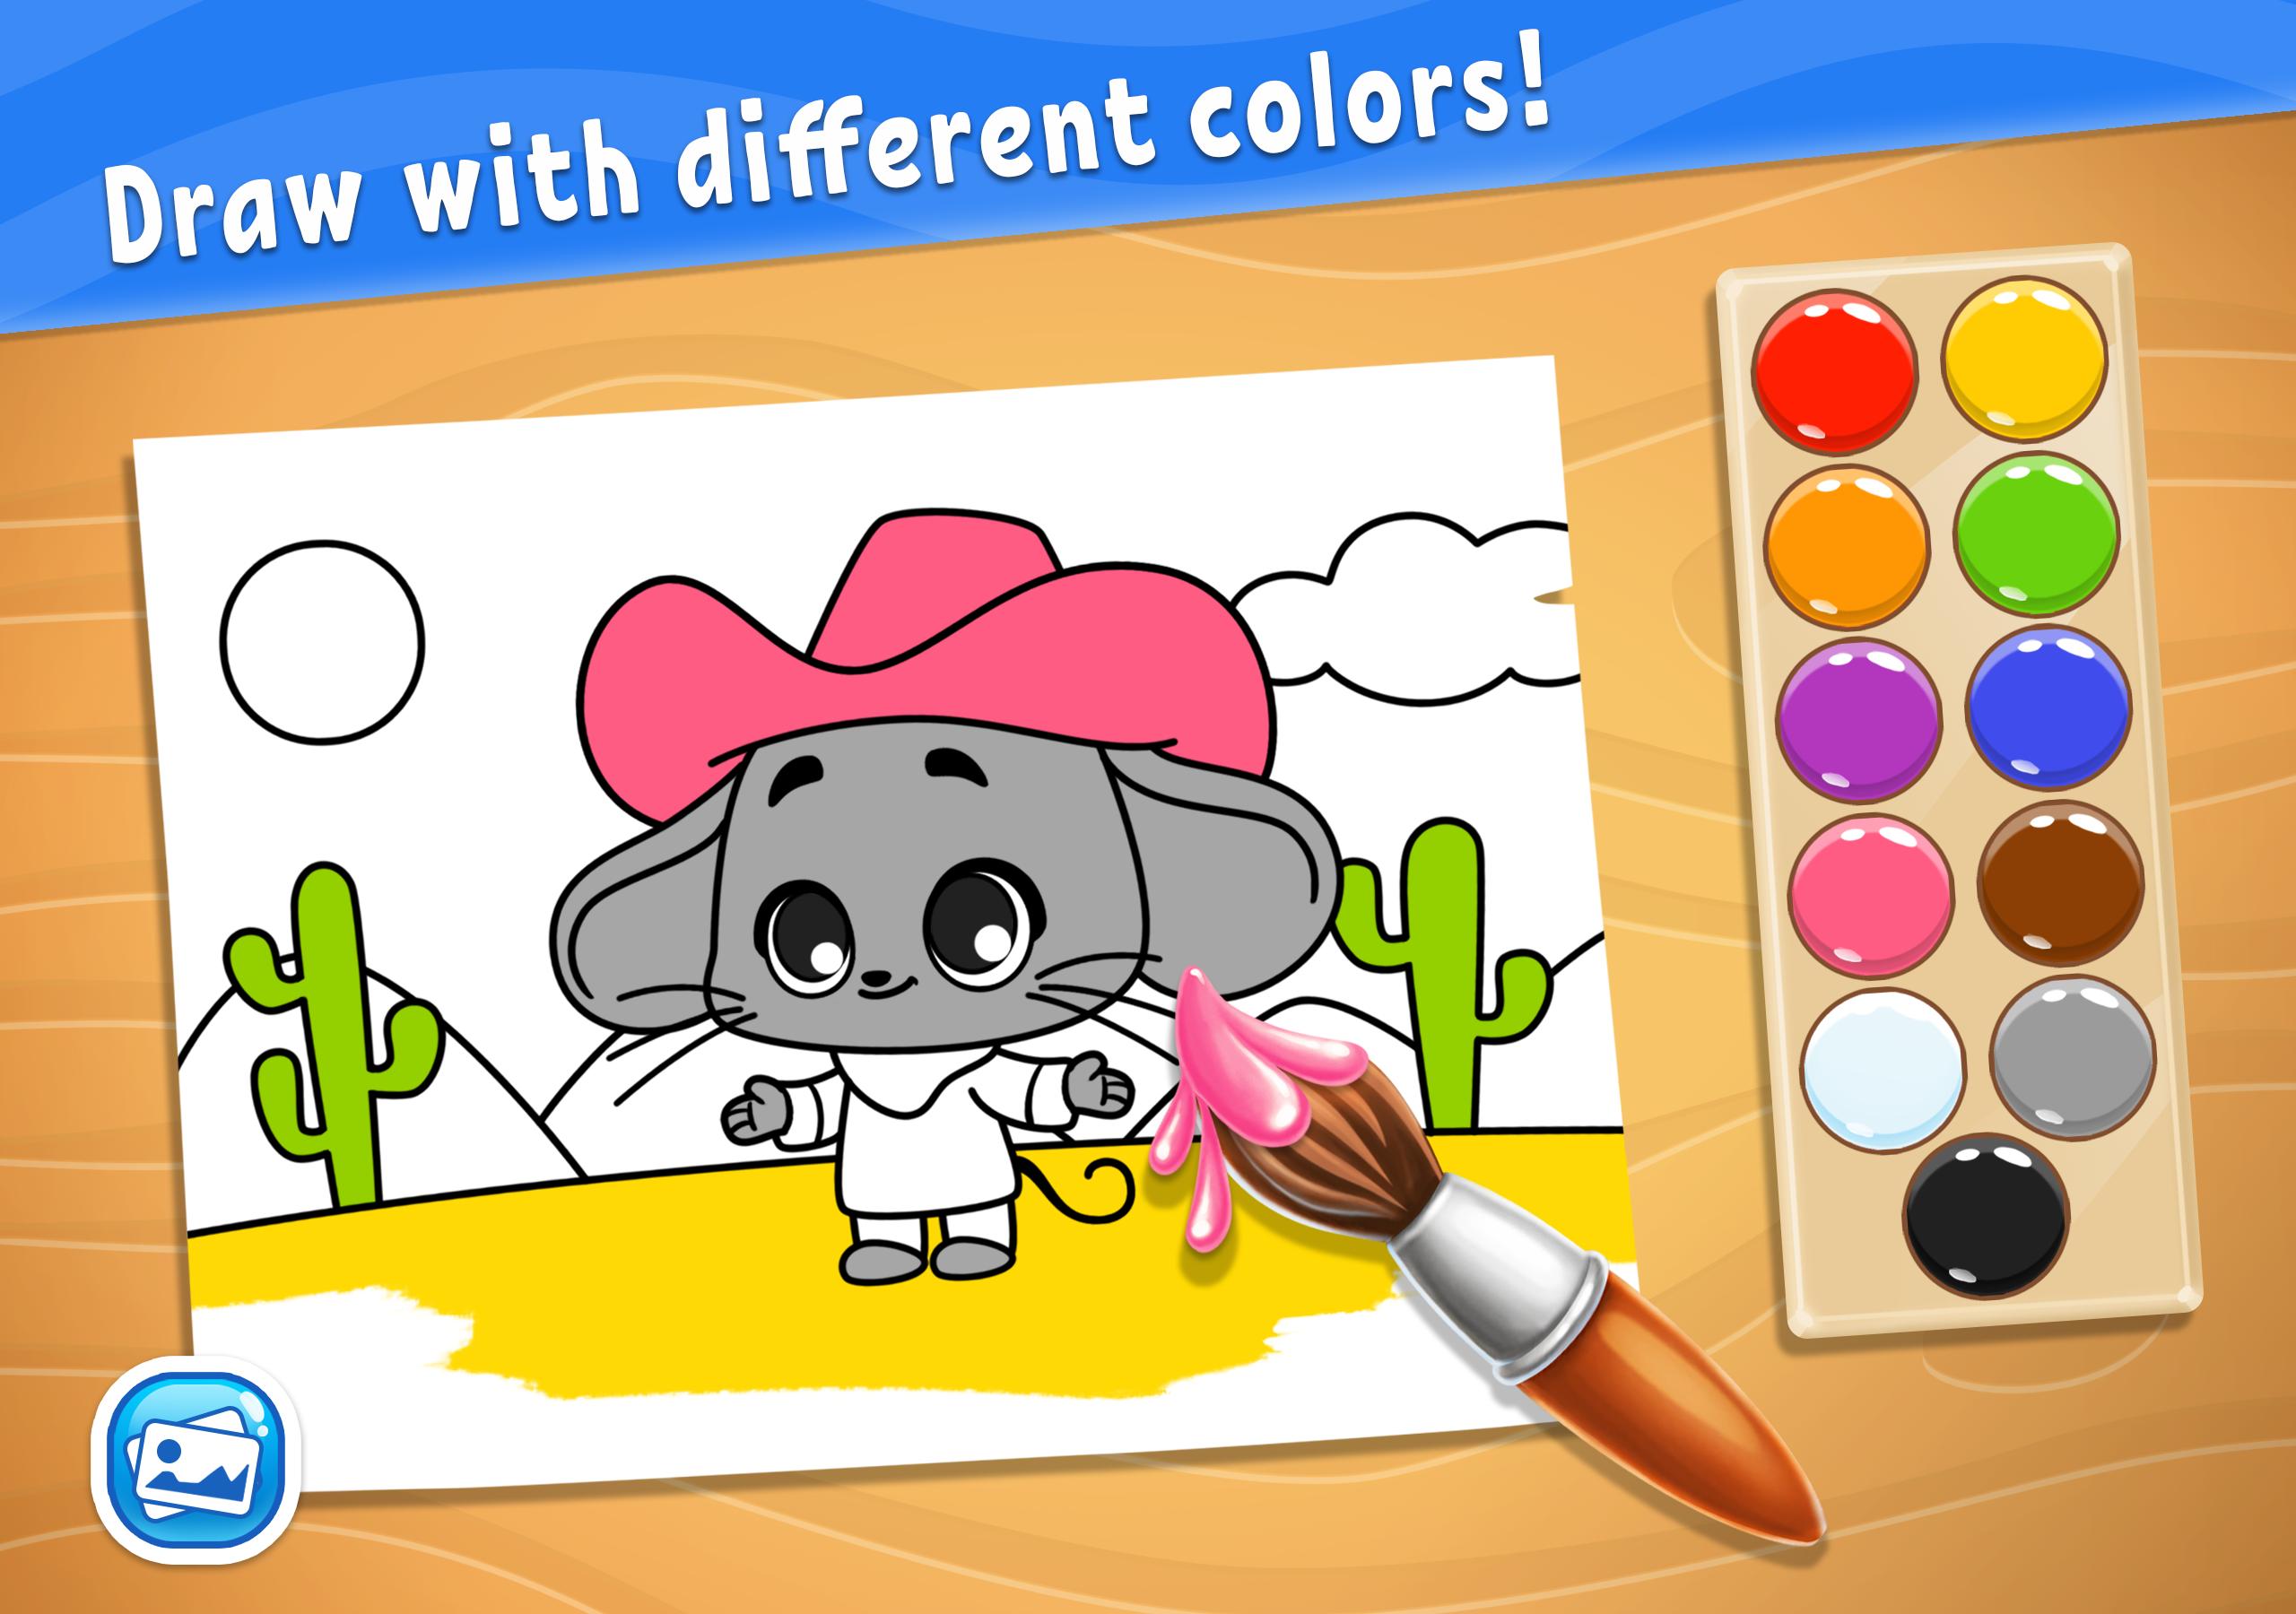 Colors for Kids, Toddlers, Babies - Learning Game 4.0.10 Screenshot 13